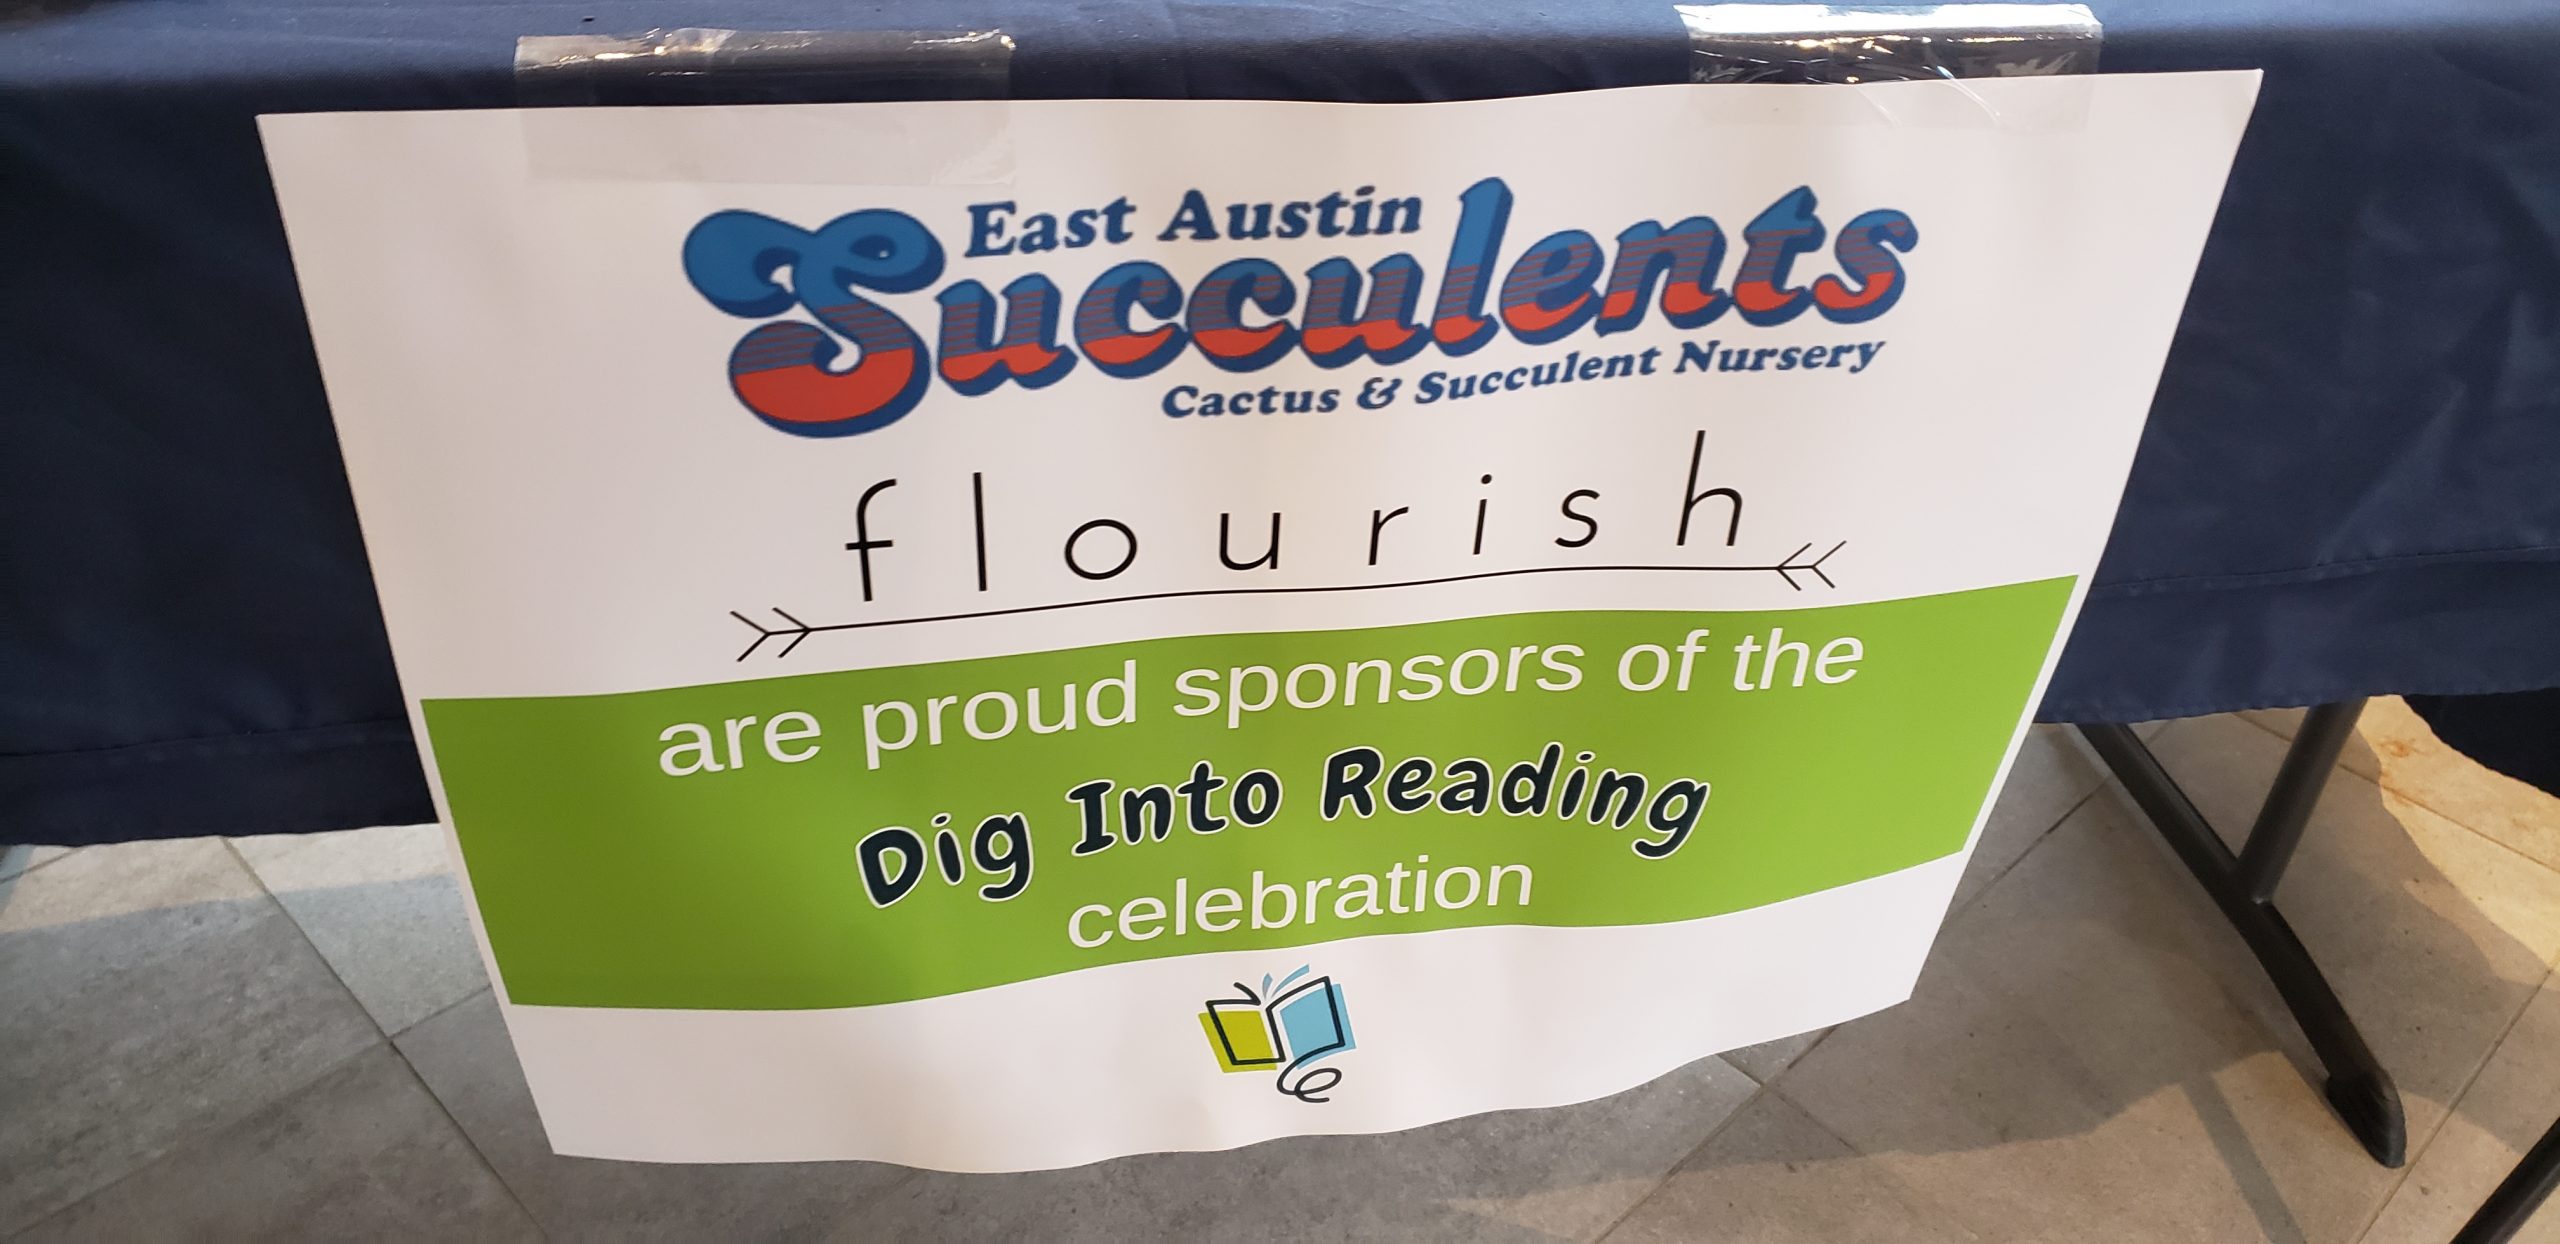 Dig Into Reading Event Celebrates BookSpring Friends & Funders